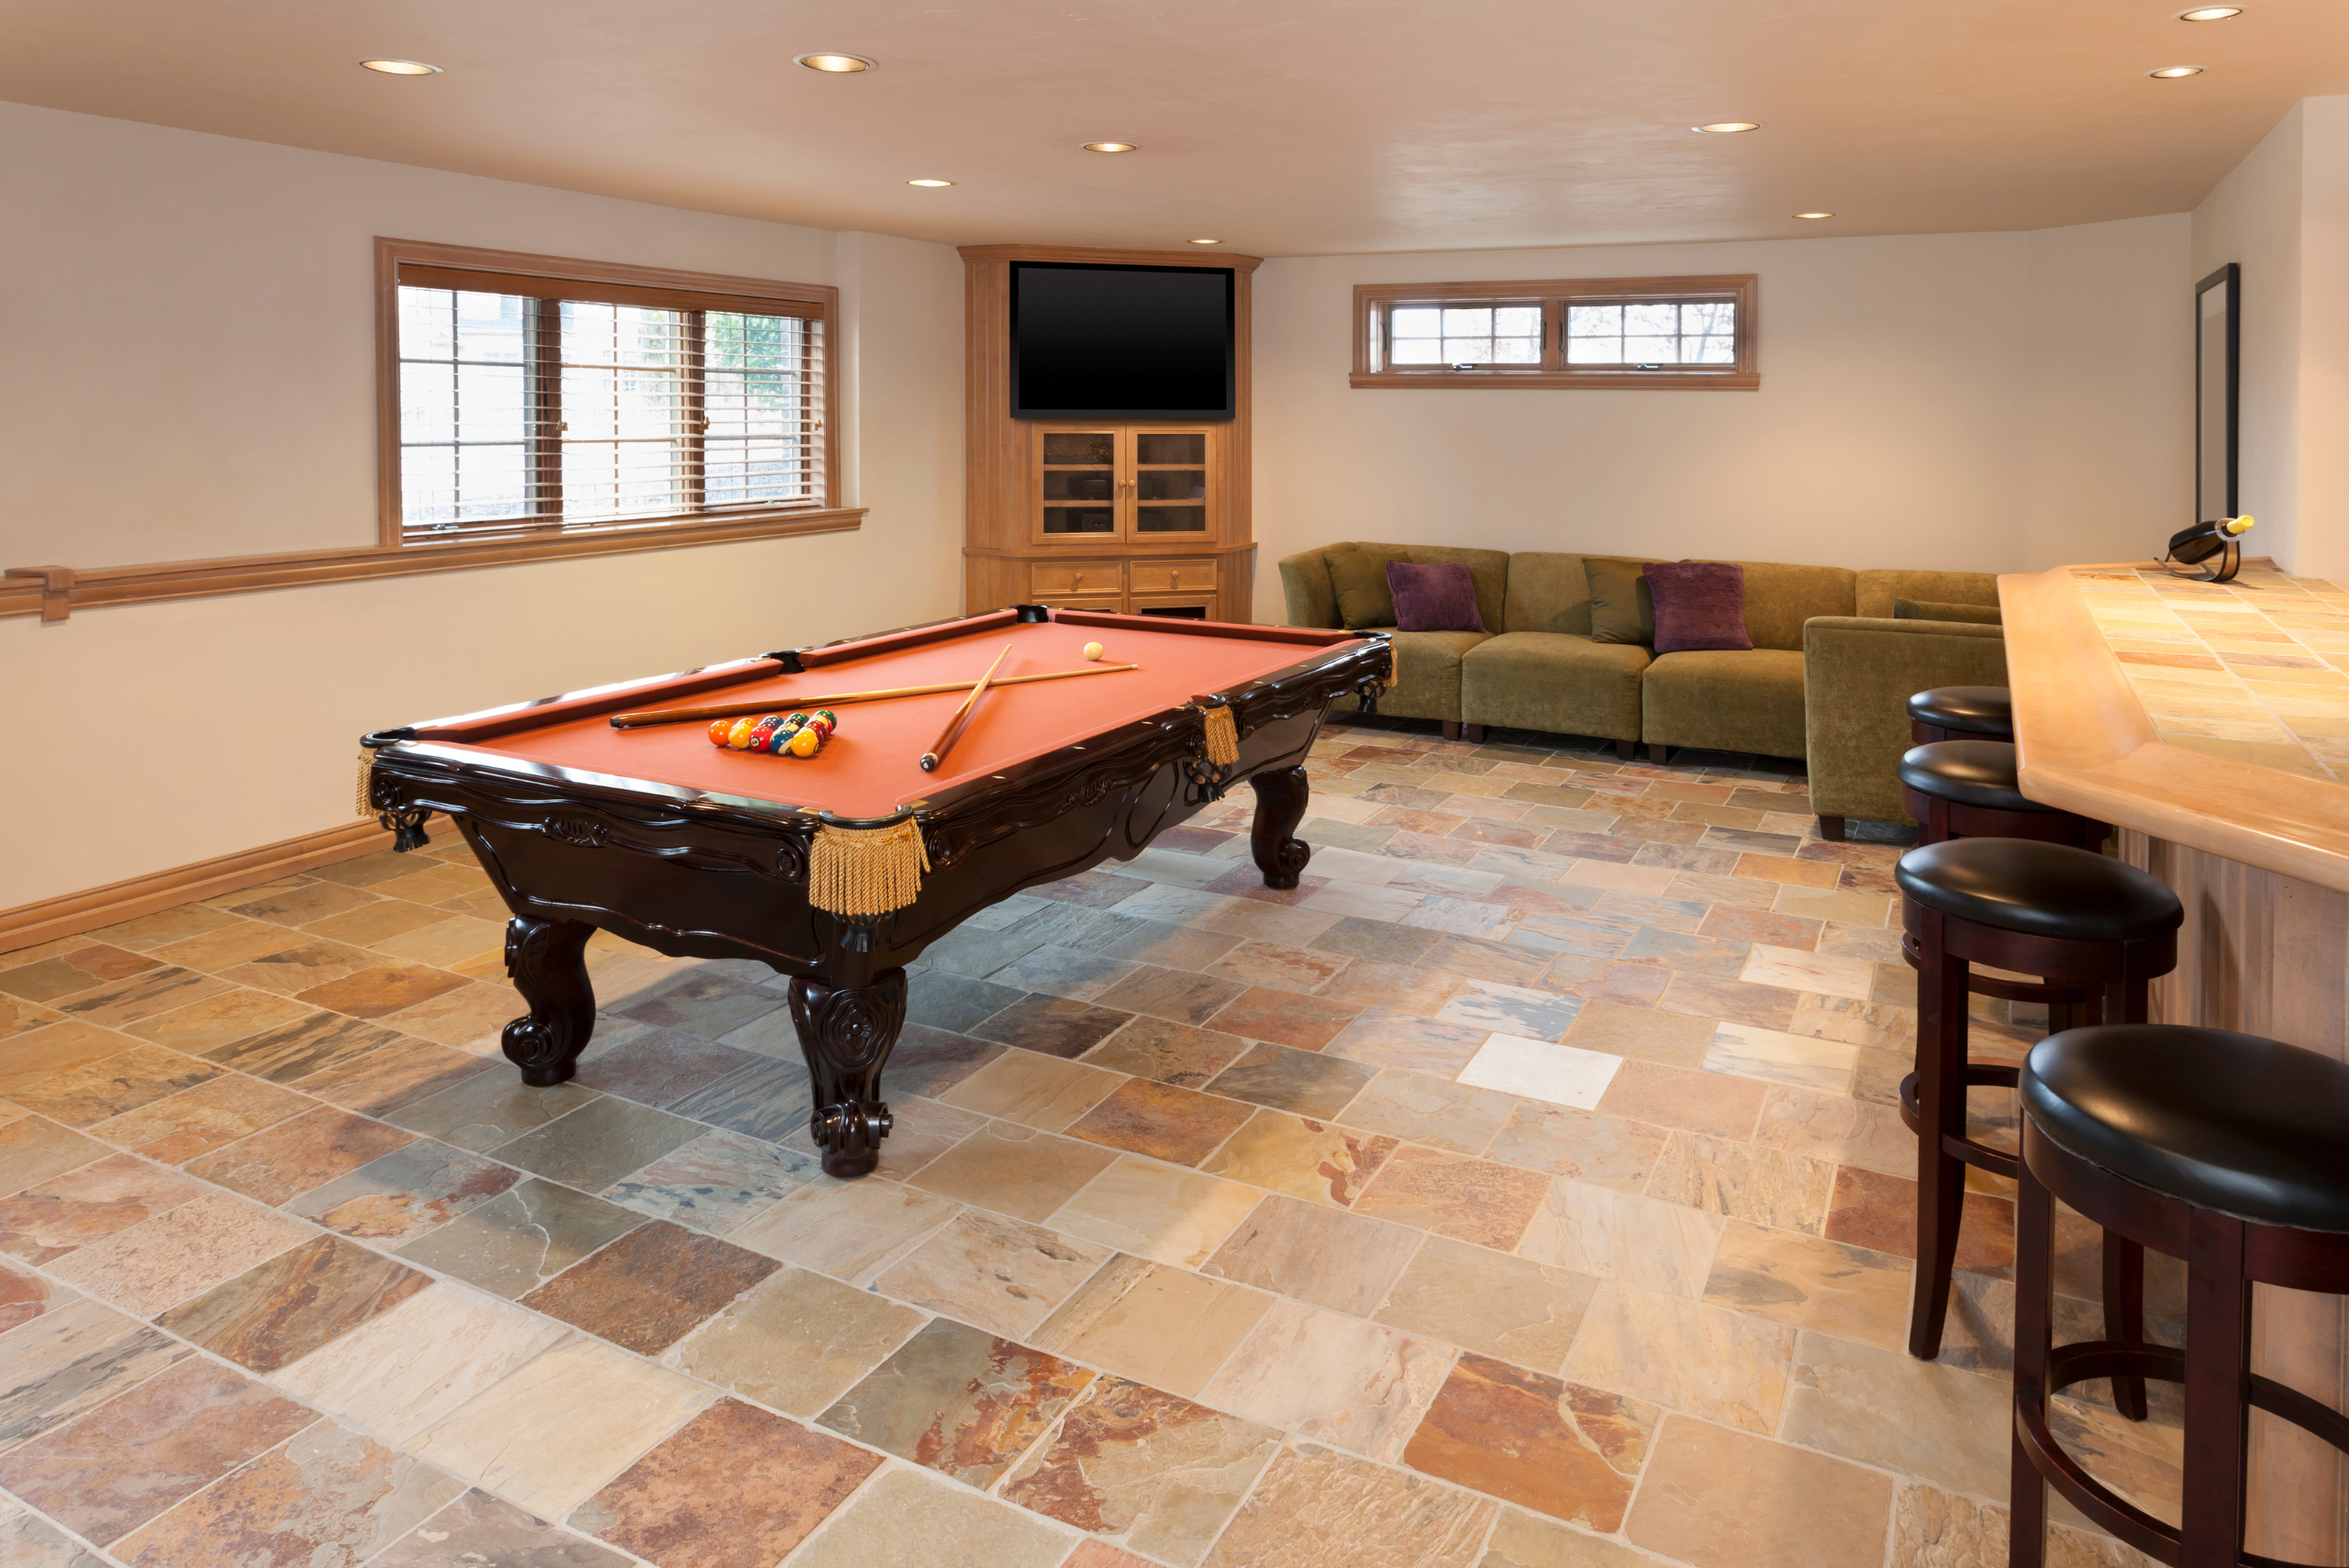 Pool table in a large finished basement with couch.